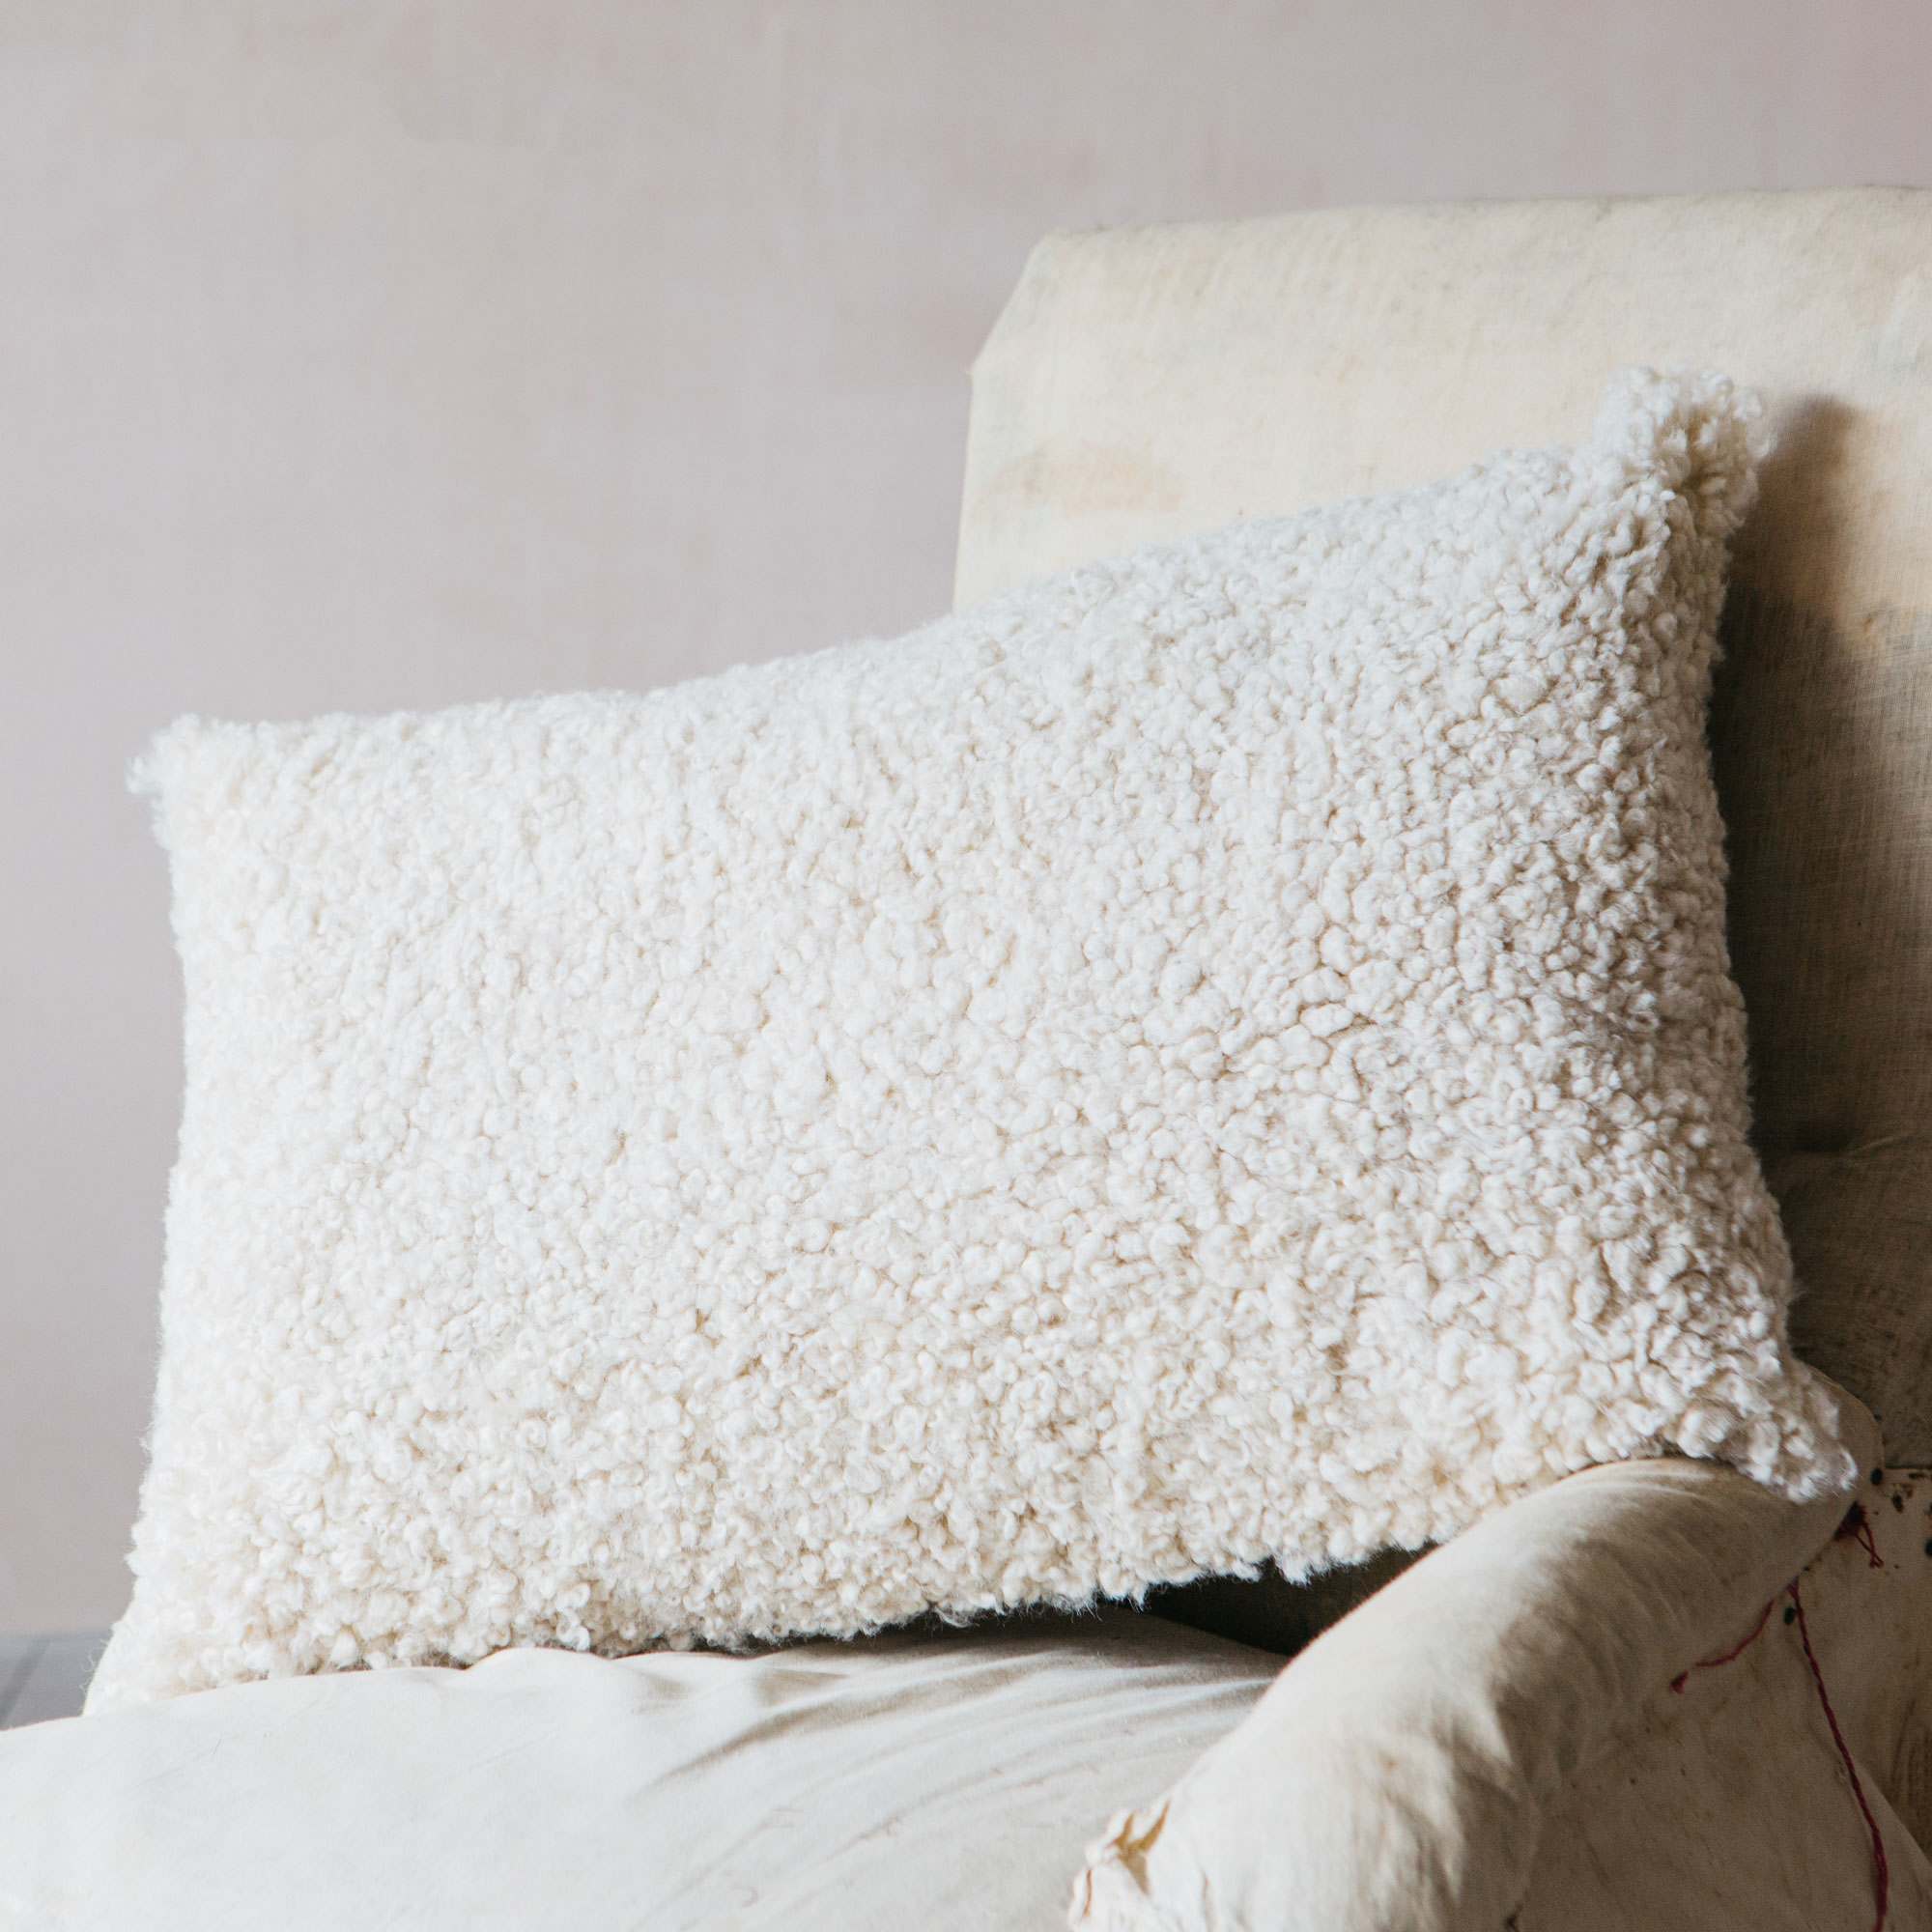 Read more about Graham and green eggshell curly sheepskin rectangular cushion